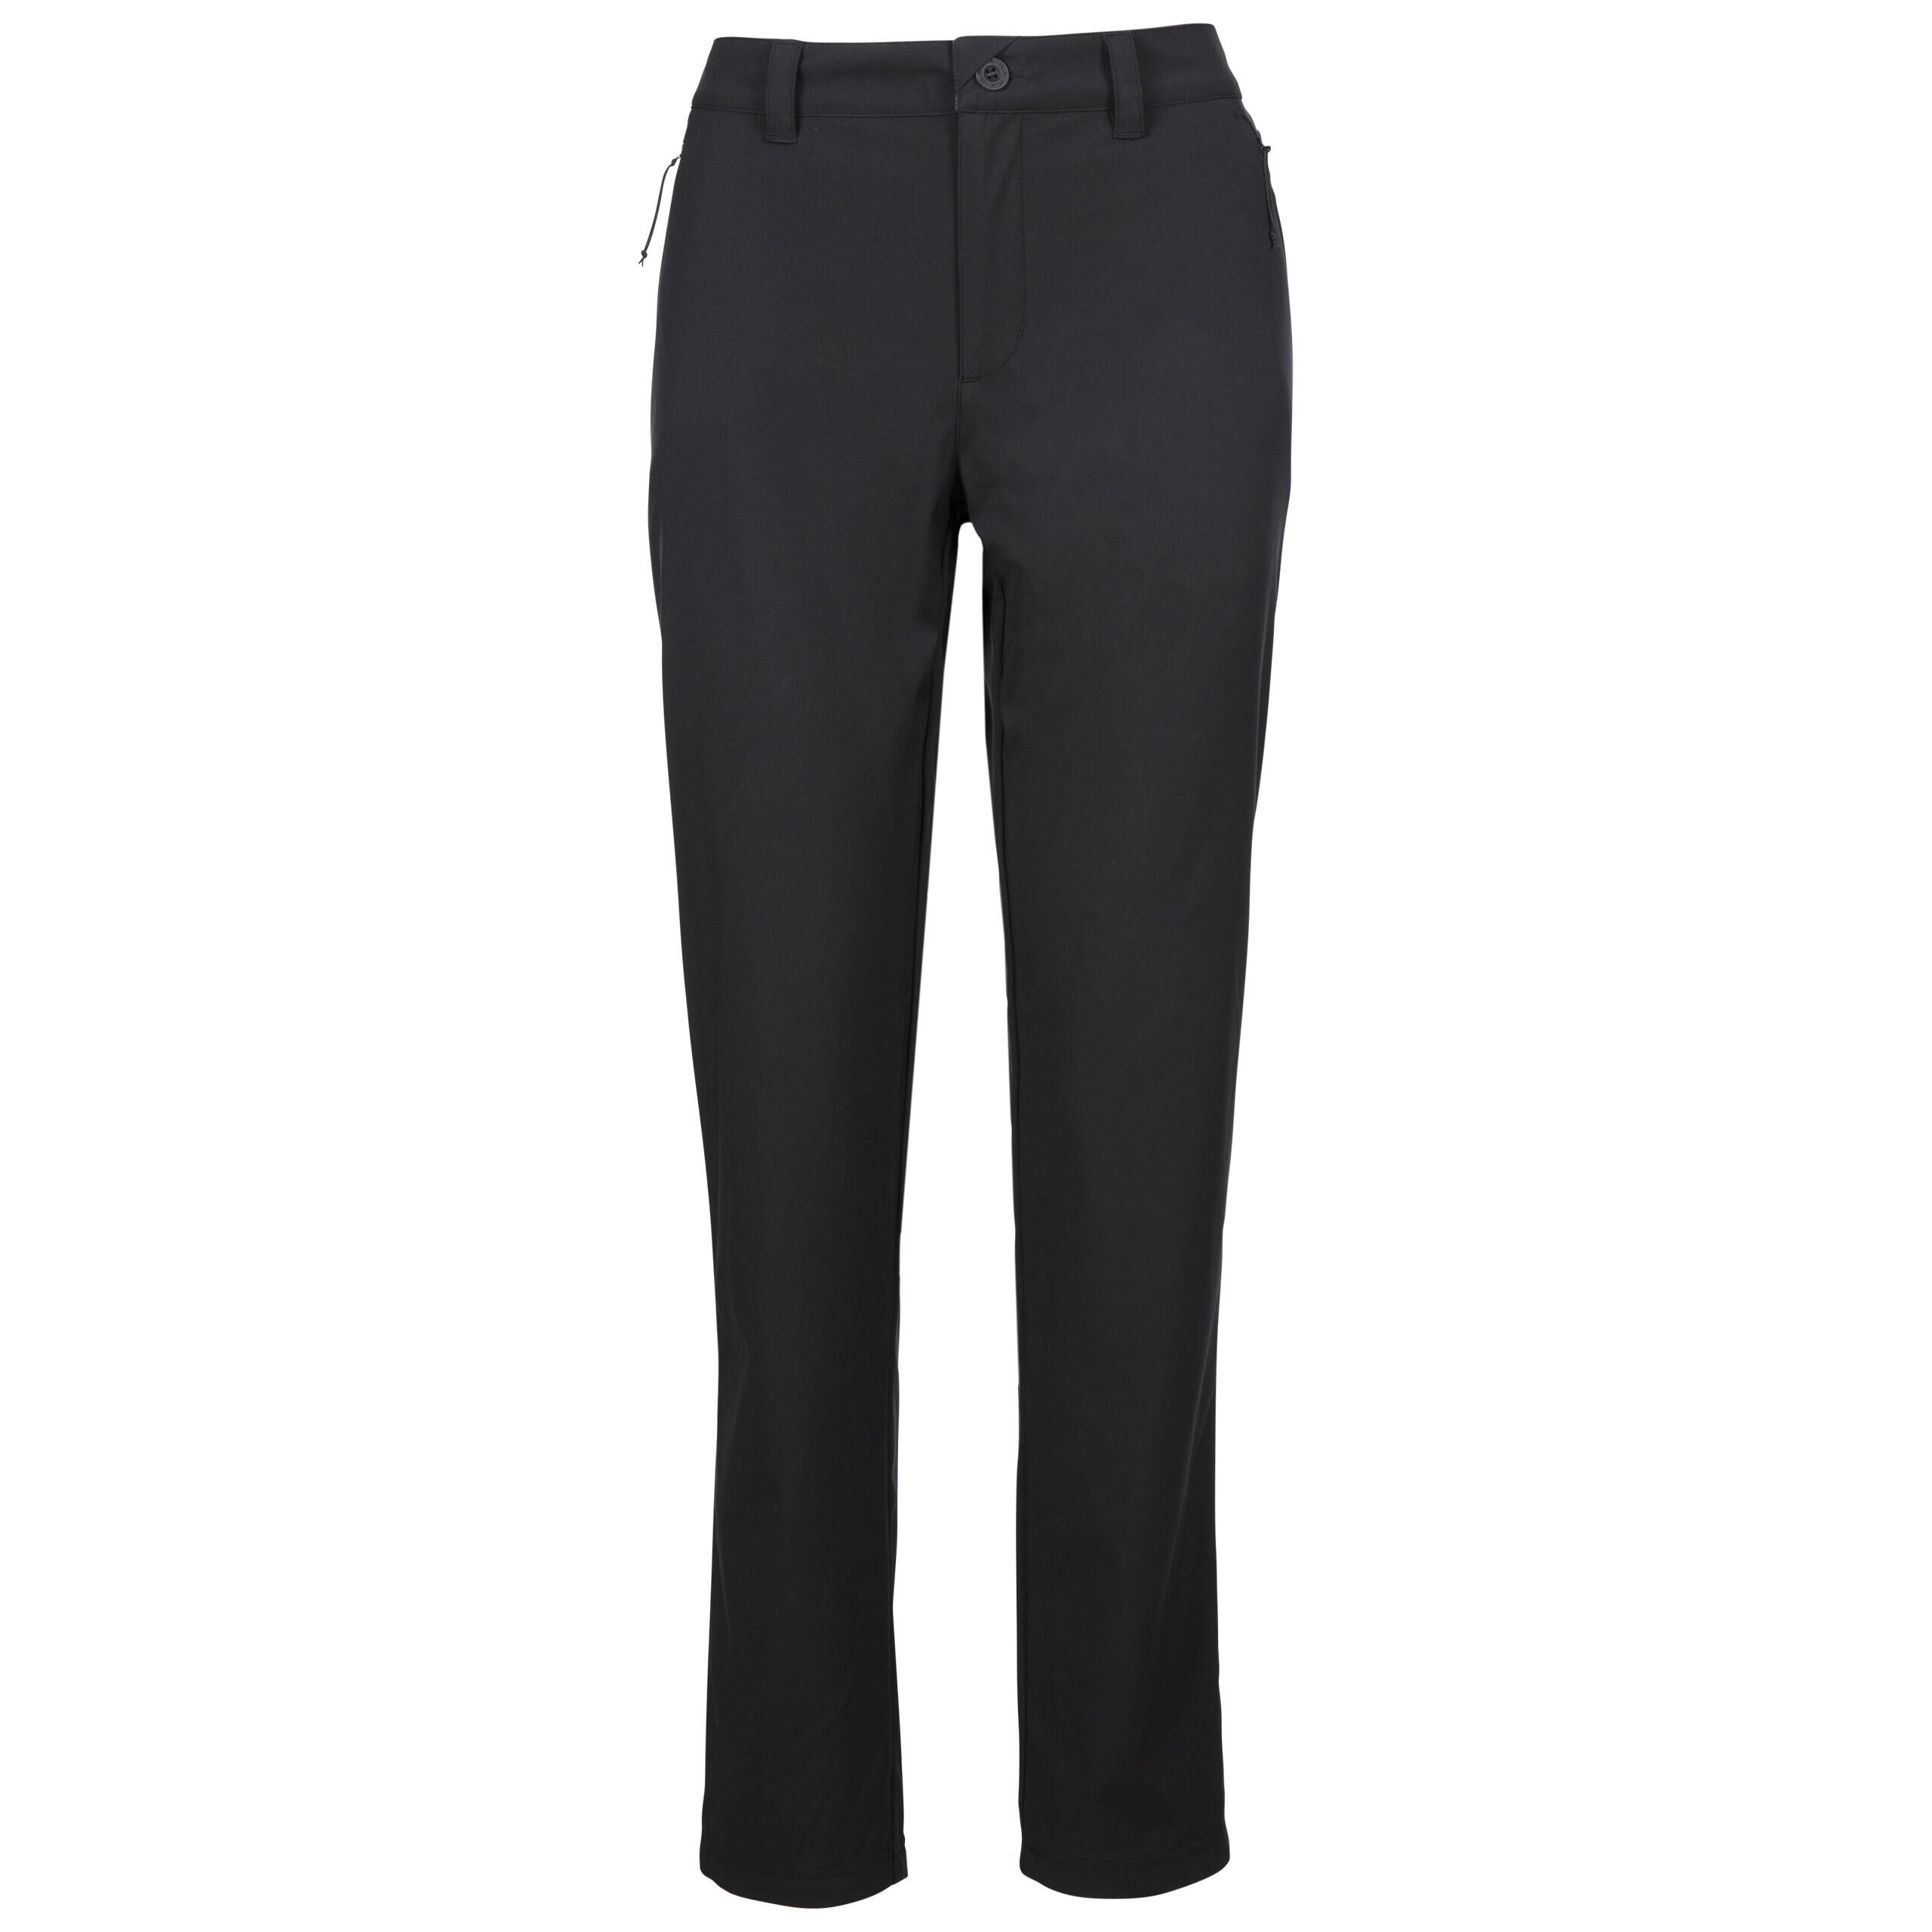 DLX Womens Waterproof Trousers Stretch Softshell Breathable Peak